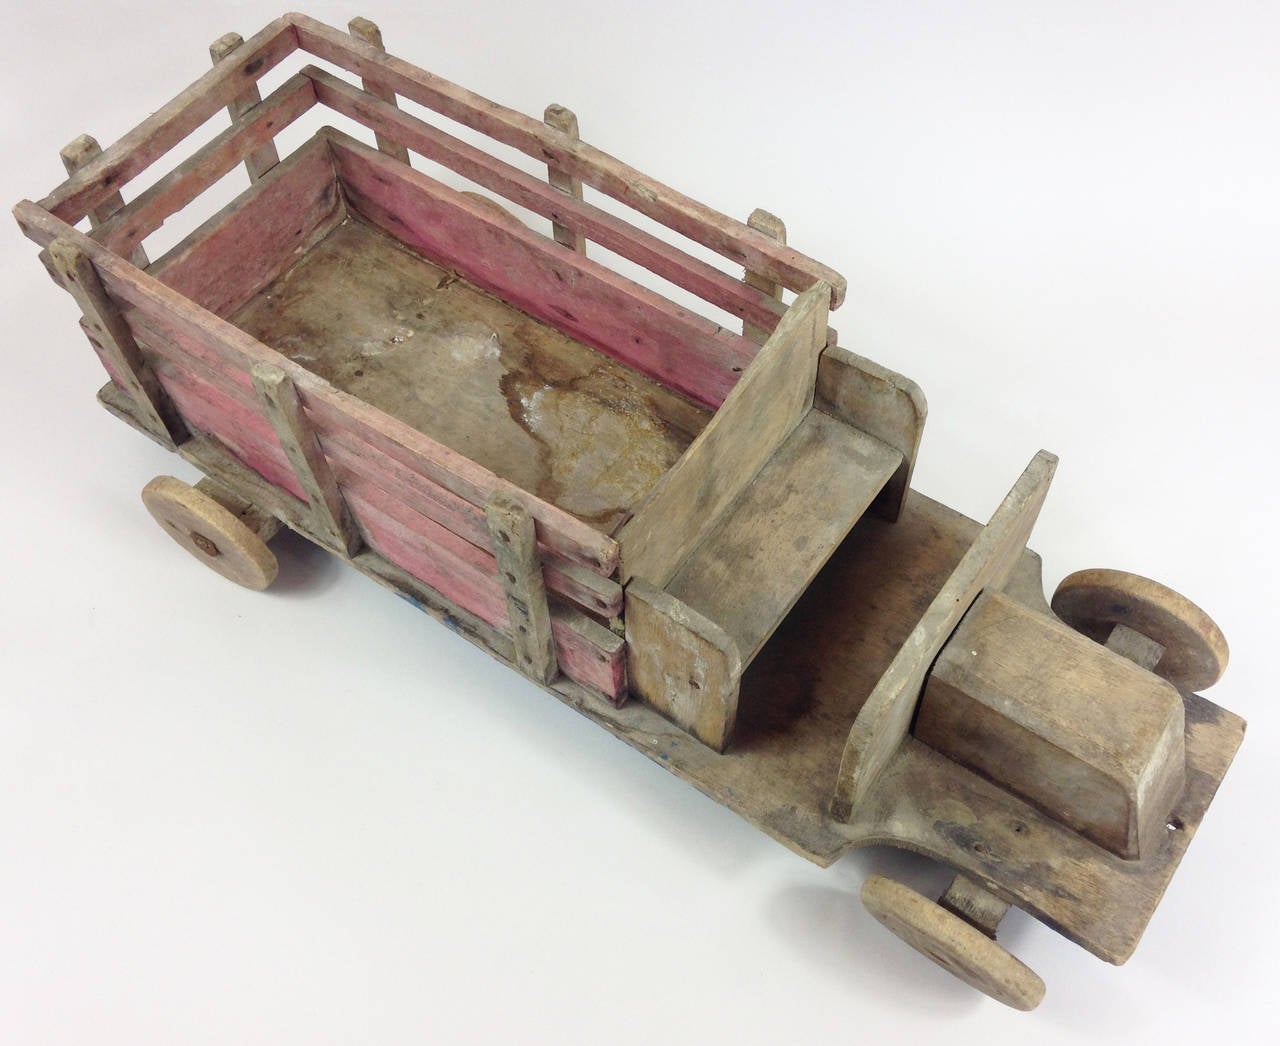 Edwardian Early 20th Century Scratch Built Wooden Toy Truck For Sale